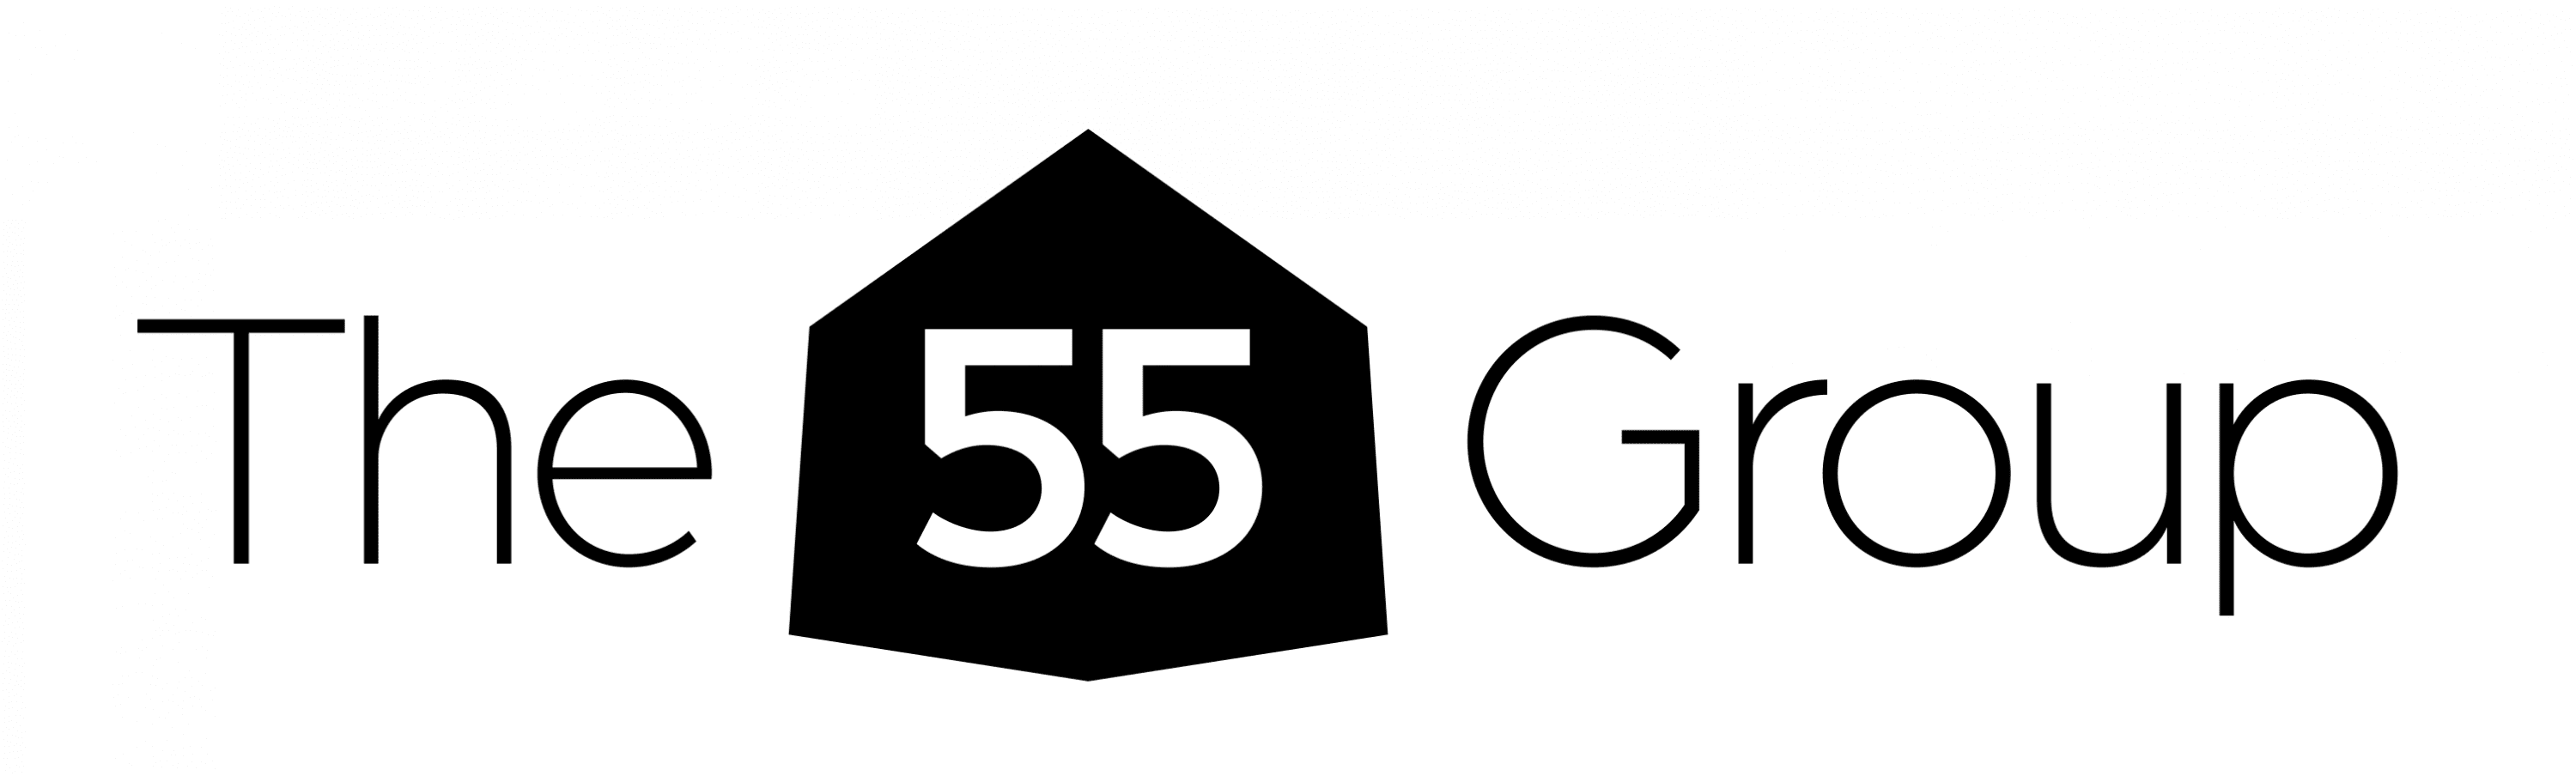 The 55 Group